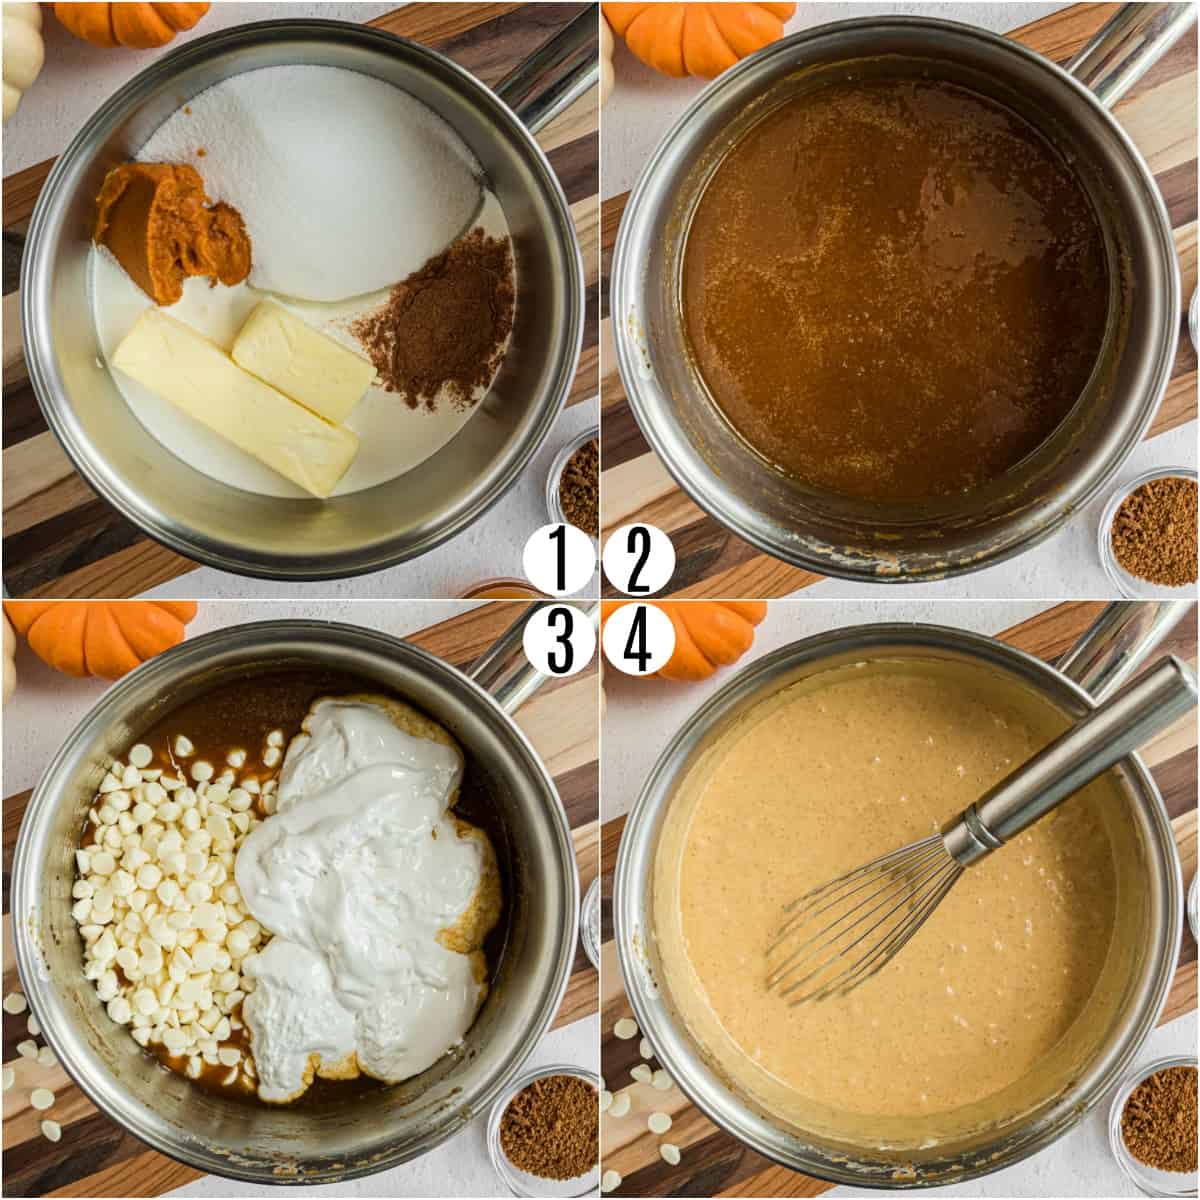 Step by step photos showing how to make pumpkin fudge.